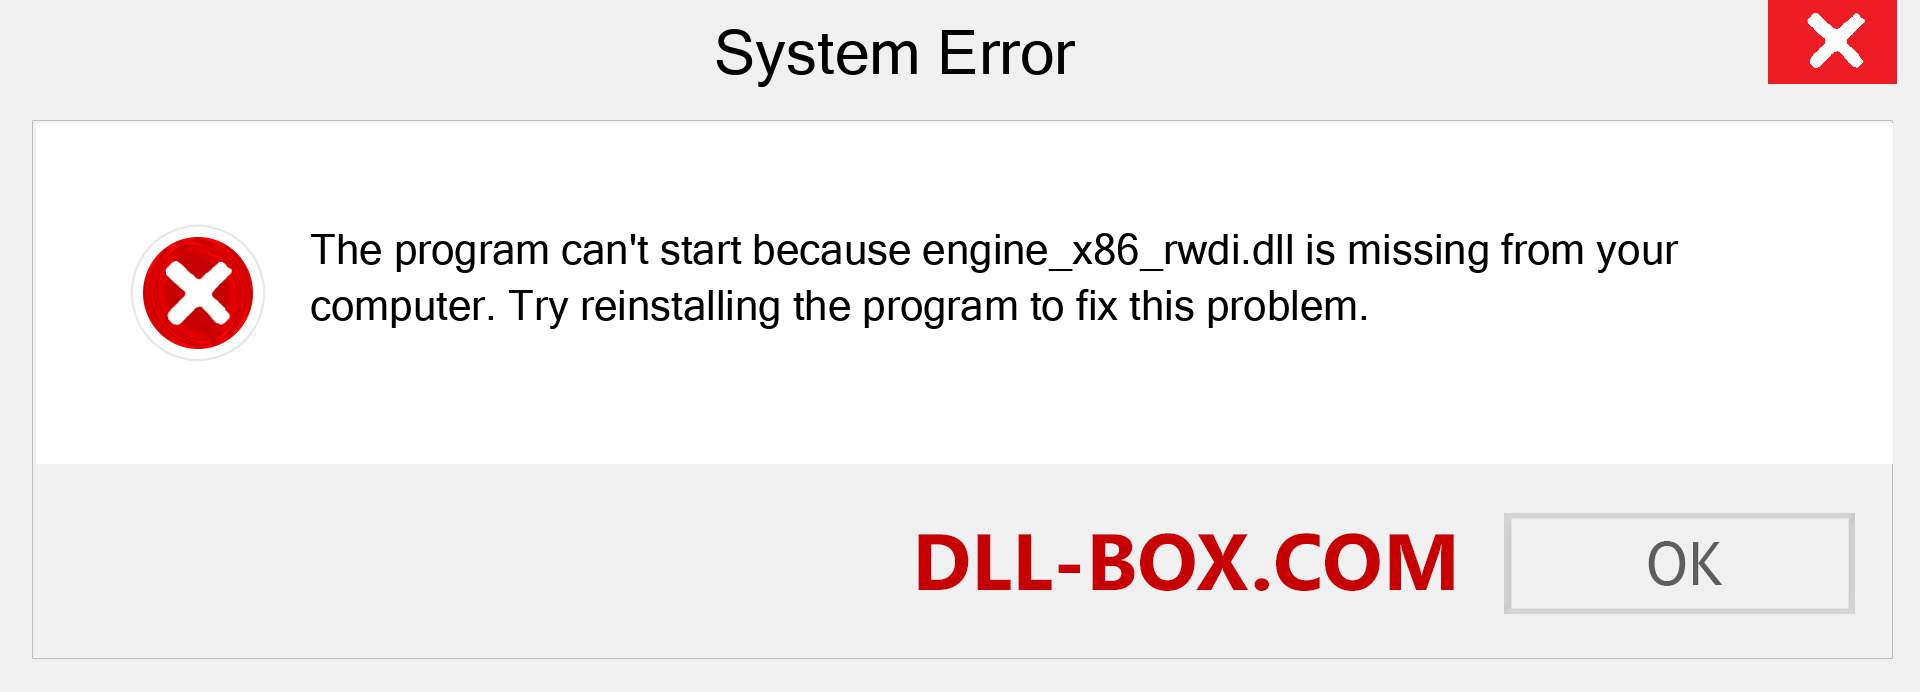  engine_x86_rwdi.dll file is missing?. Download for Windows 7, 8, 10 - Fix  engine_x86_rwdi dll Missing Error on Windows, photos, images